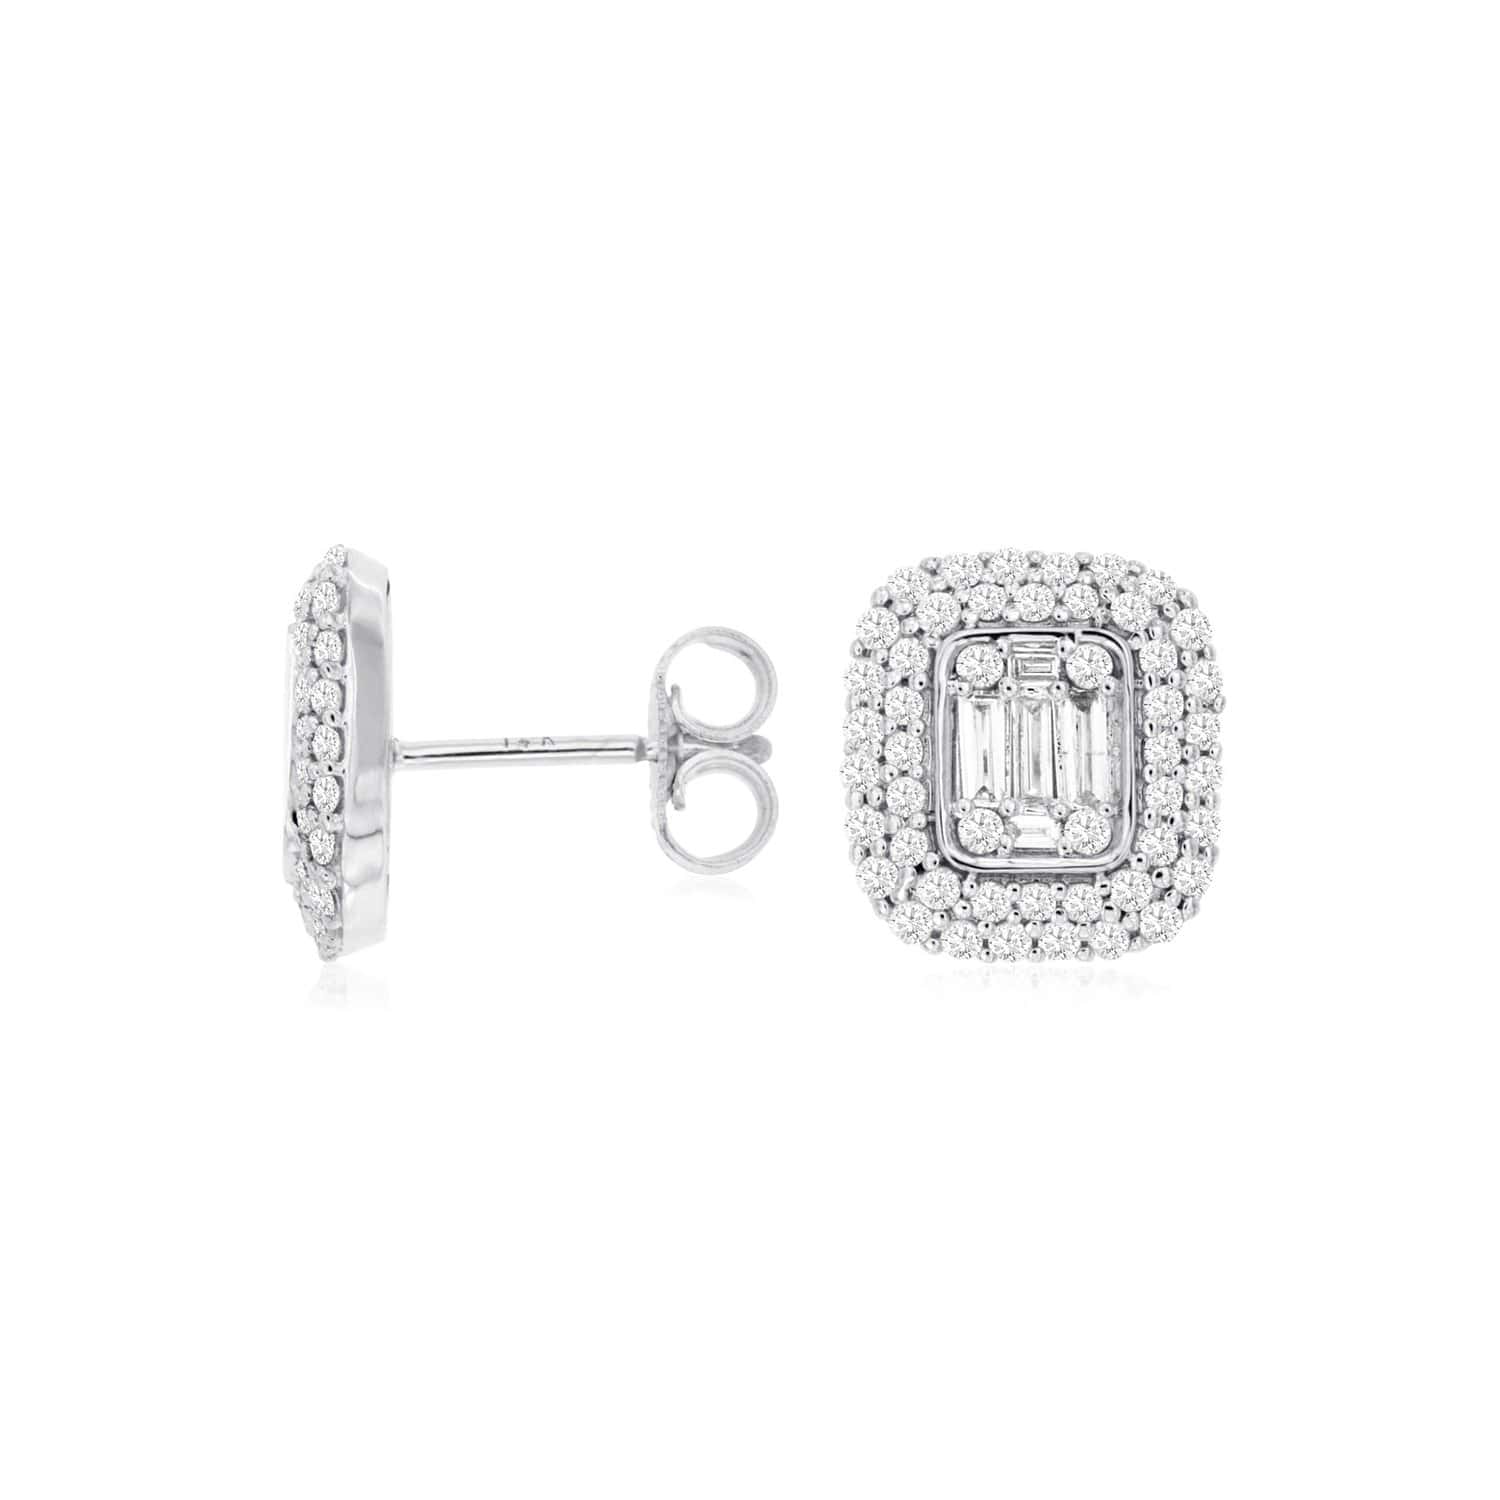 White Gold Double Halo Baguette & Round Diamond Earrings